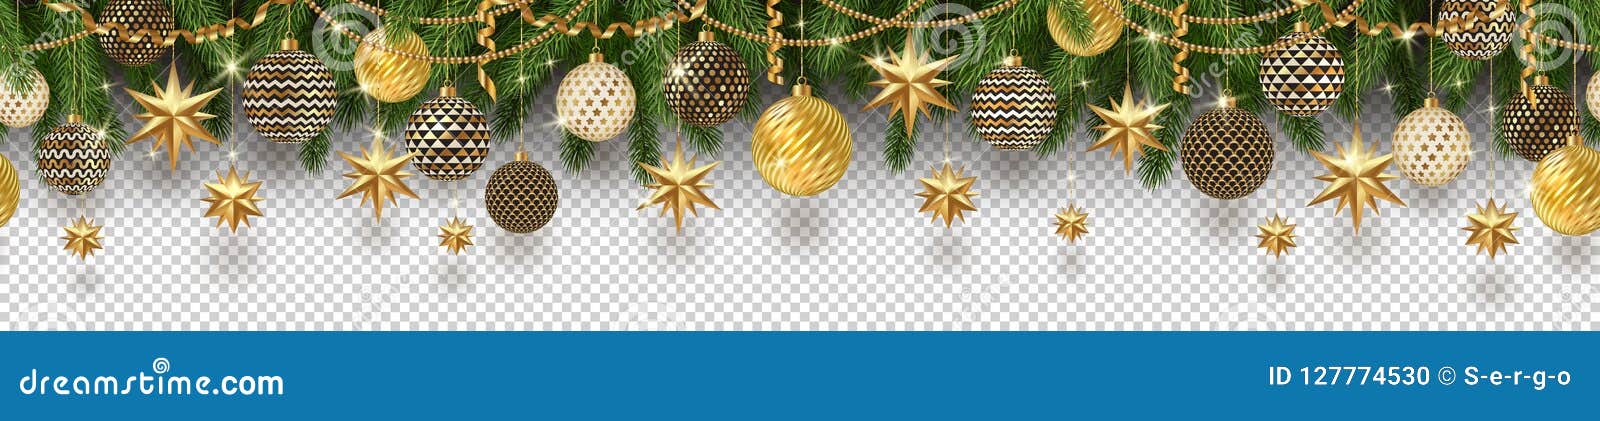 christmas golden decoration and christmas tree branches on a checkered background. can be used on any background. seamless frieze.